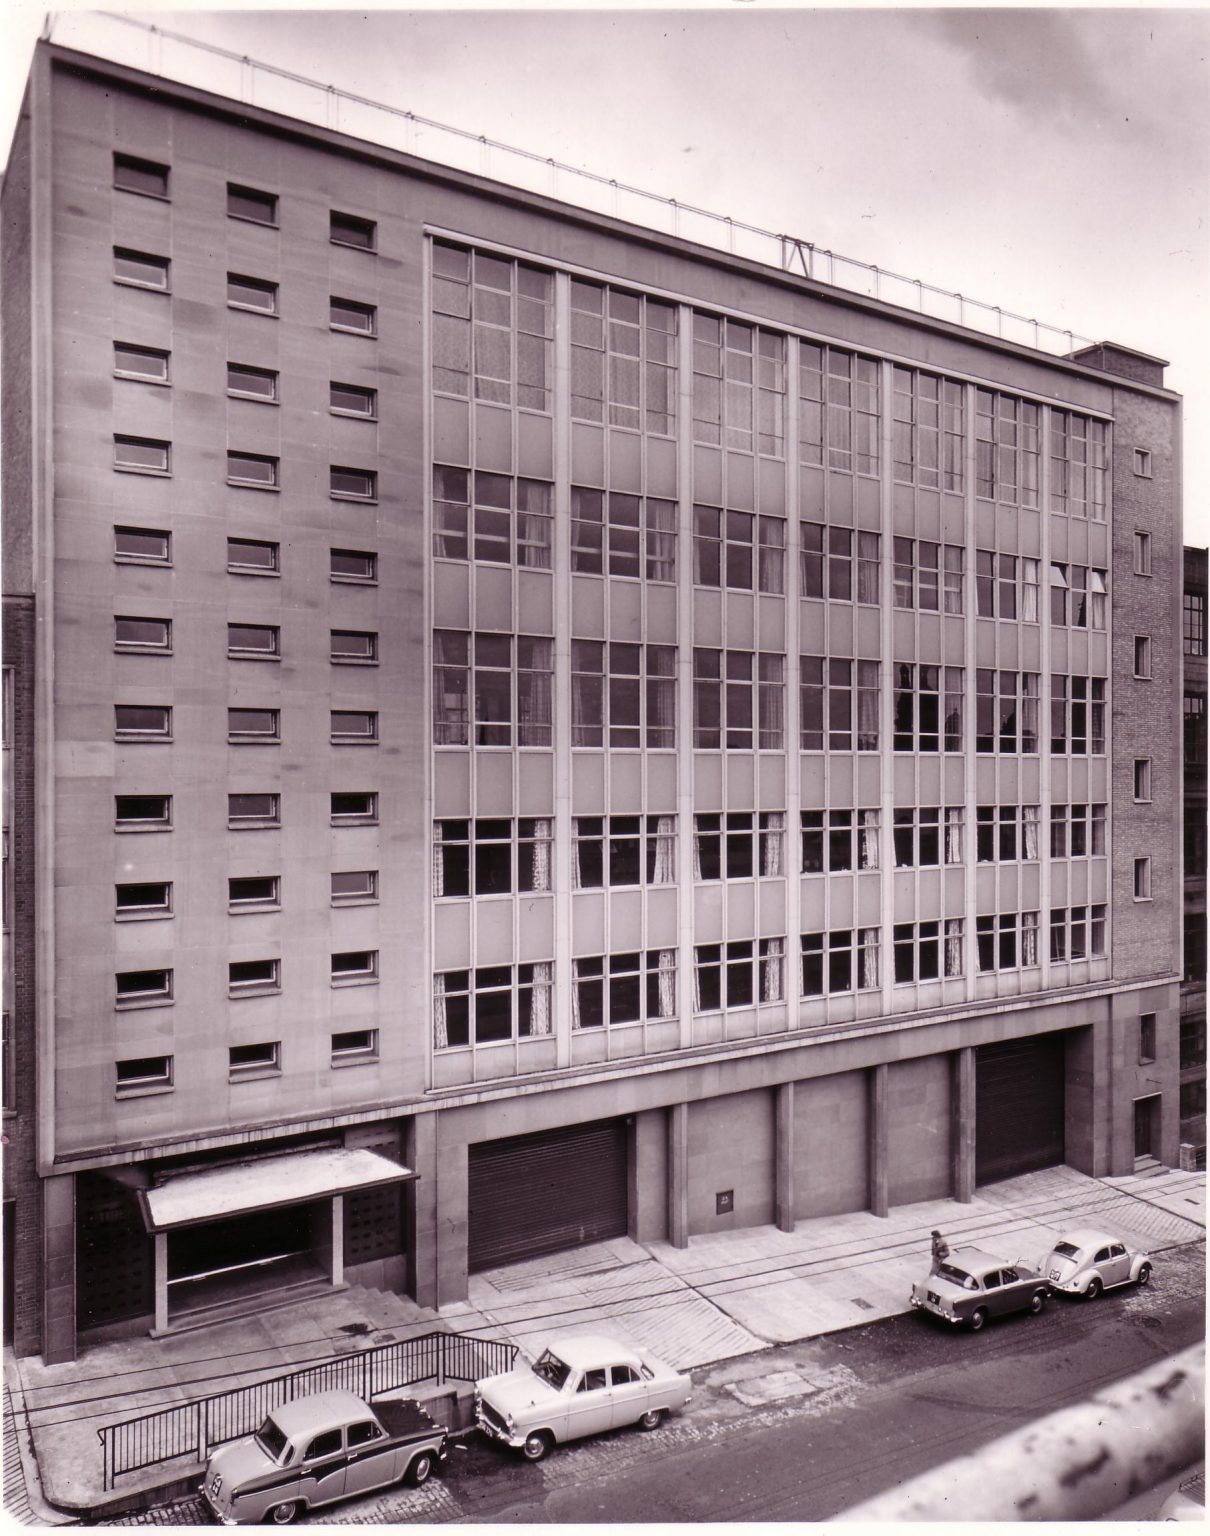 An old photograph in aged purple tone greyscale, showing the John Street building with vintage cars parked outside